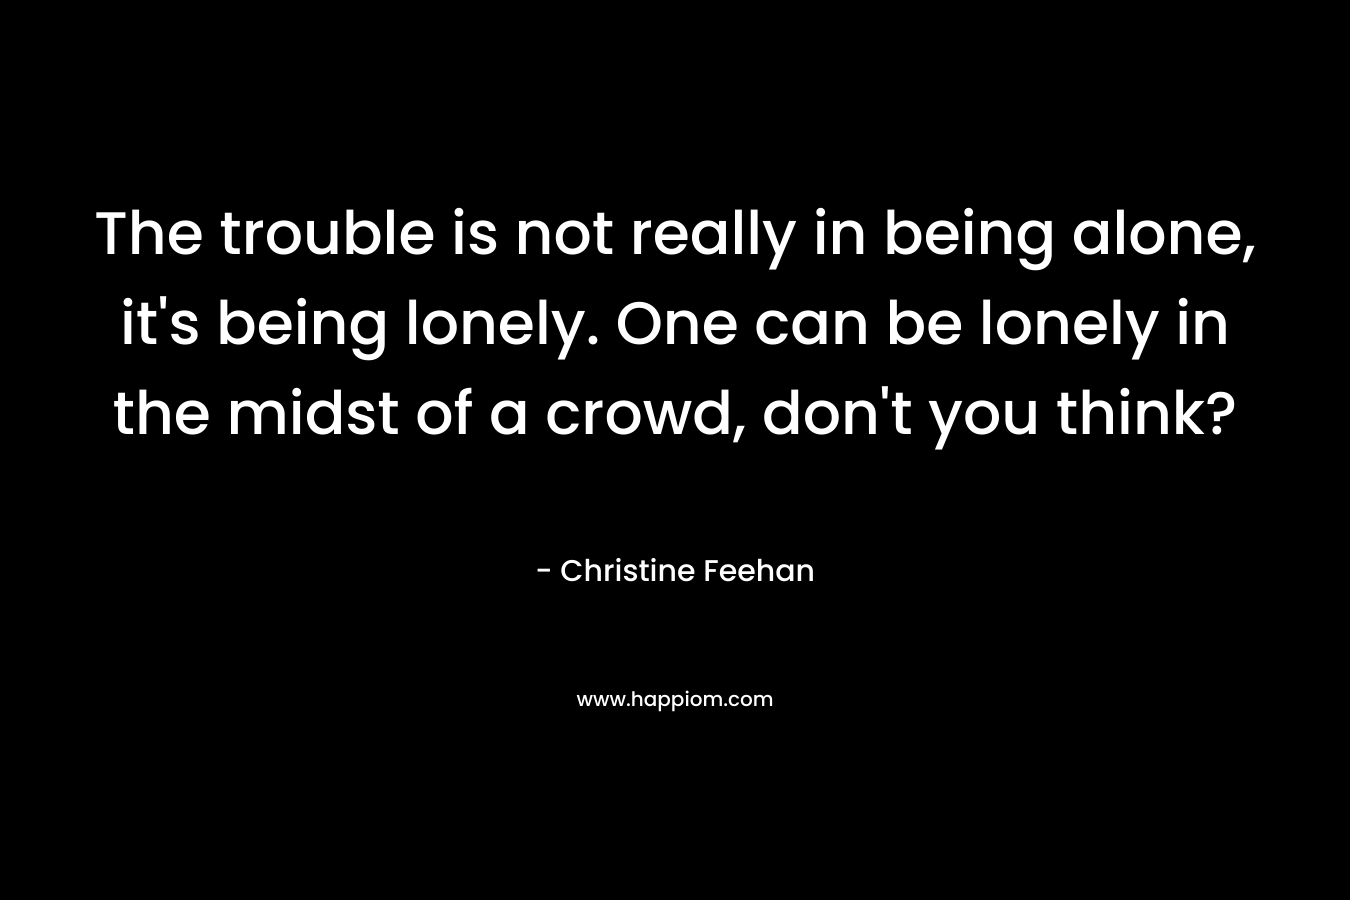 The trouble is not really in being alone, it's being lonely. One can be lonely in the midst of a crowd, don't you think?